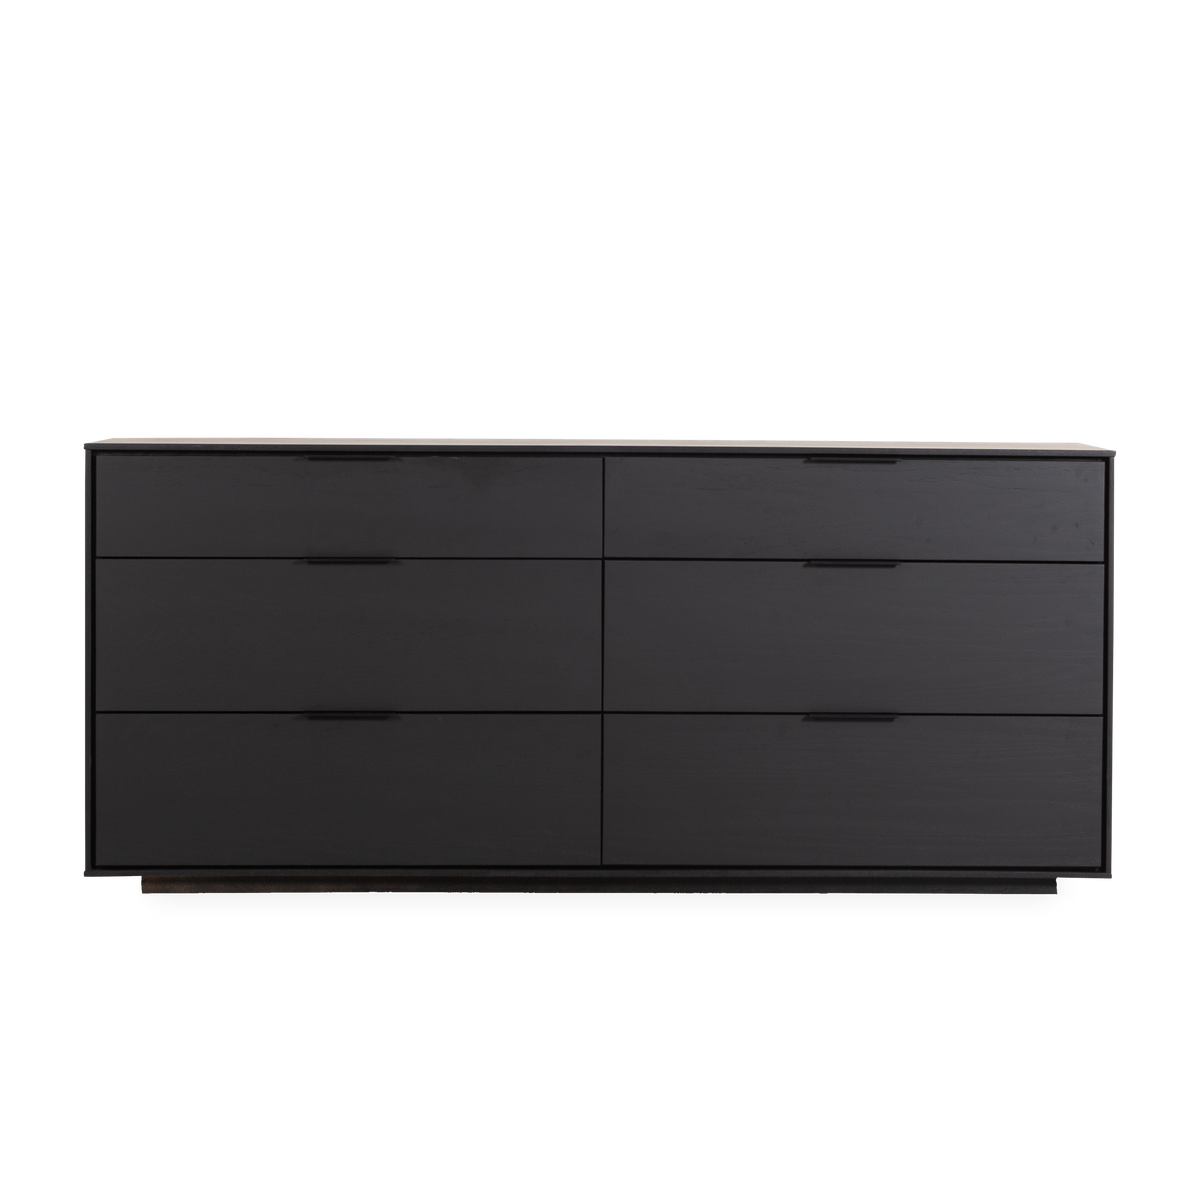 Sleek lines and six drawers for storage make the Durham Dresser a practical and sophisticated choice.